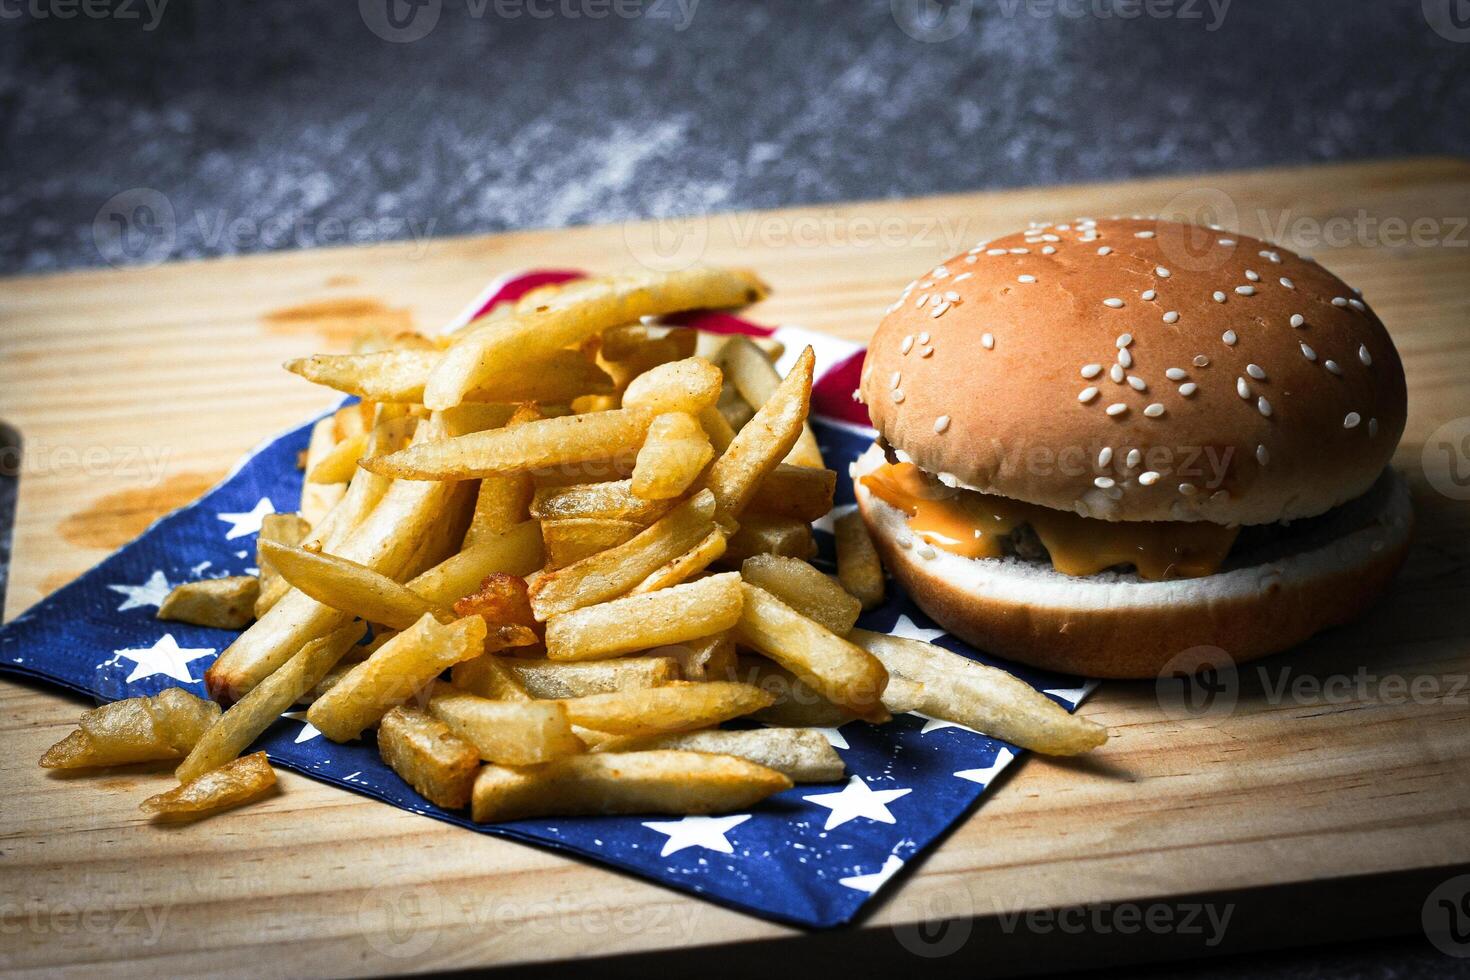 Cheese burger - American cheese burger with Golden French fries on wooden board photo